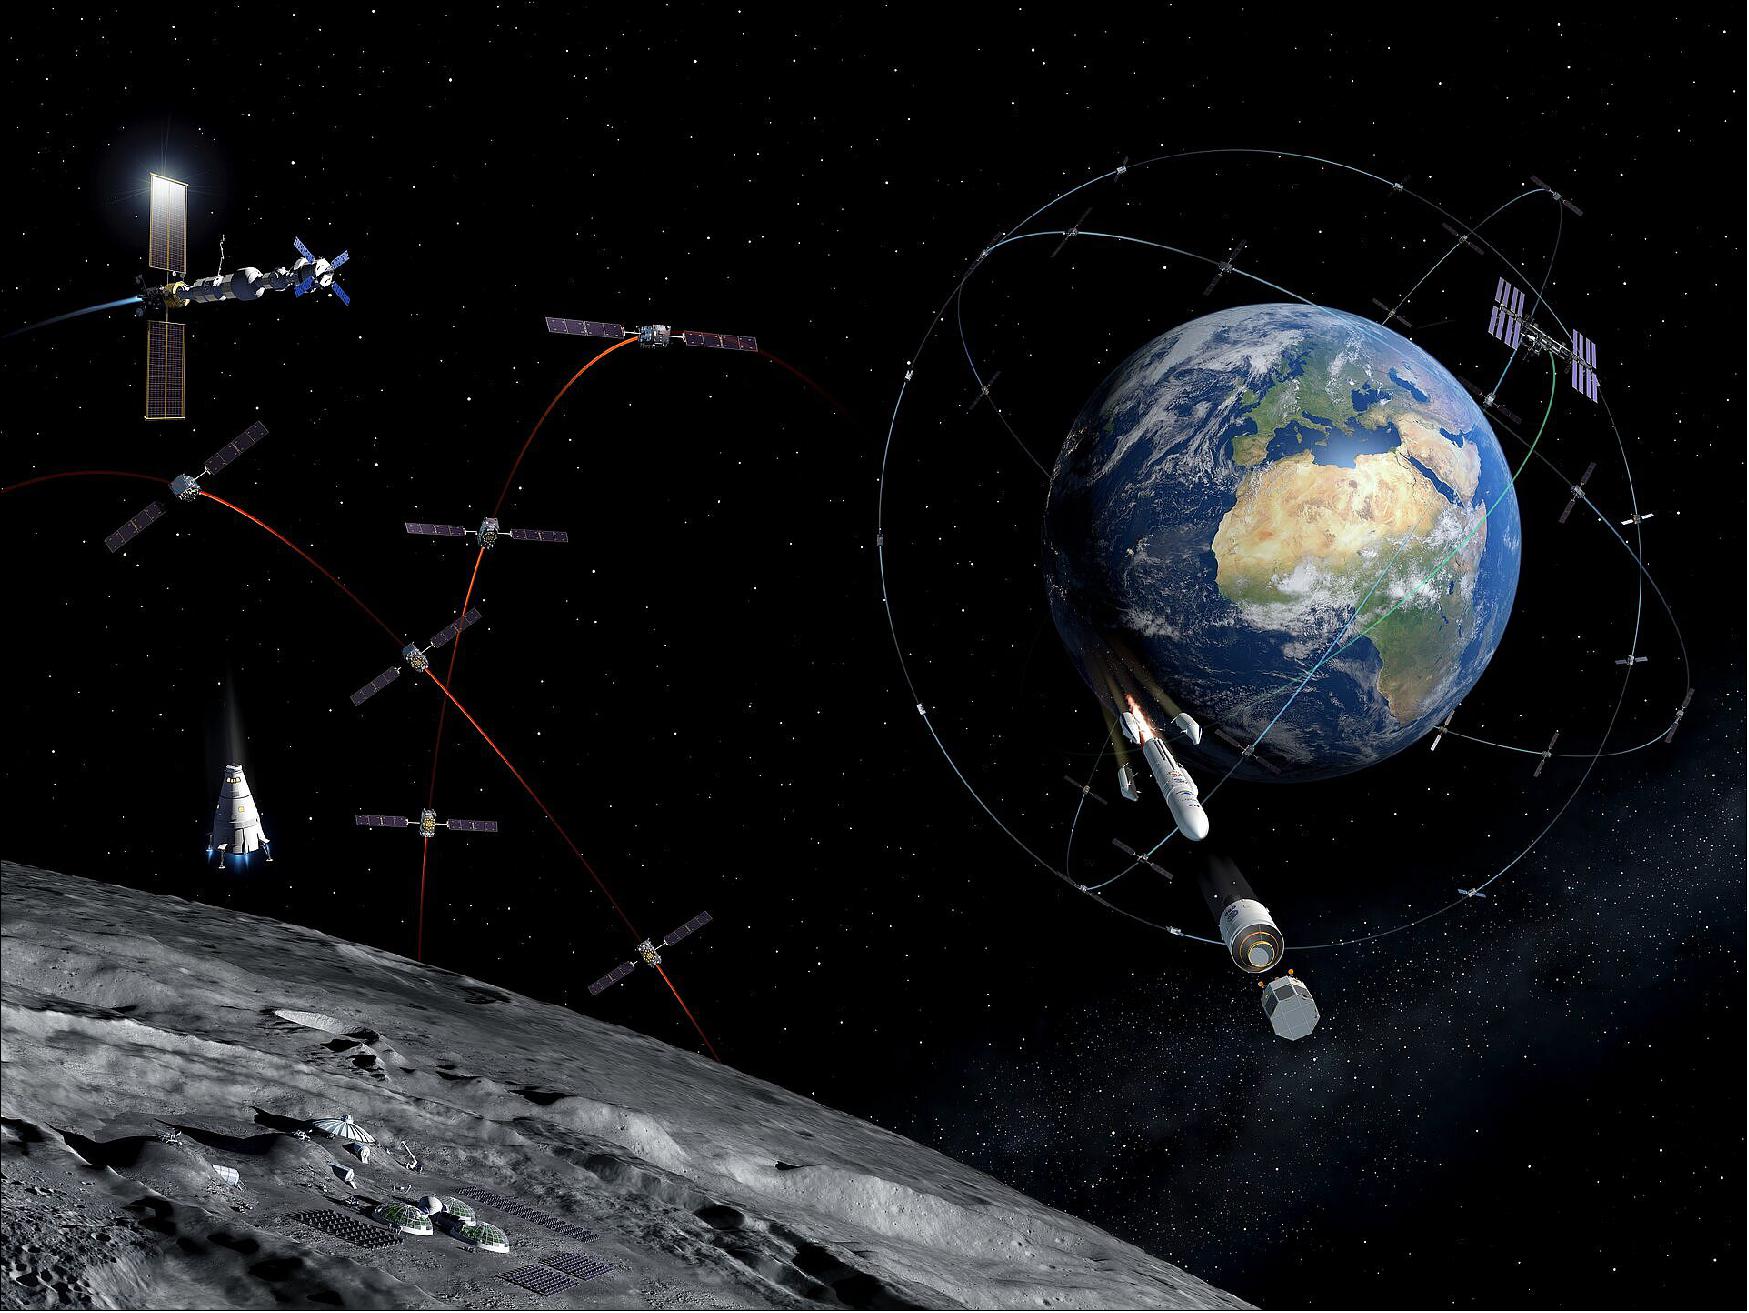 Figure 15: Extending satnav to the Moon. Terrestrial satnav can in principle be used to perform satnav fixes in lunar orbit. Then as a next step, as part of the Moonlight initiative, dedicated lunar satellites and surface beacons in regions of interest would increase the precision of satnav fixes, allowing reliable surface navigation and landing guidance (image credit: ESA)